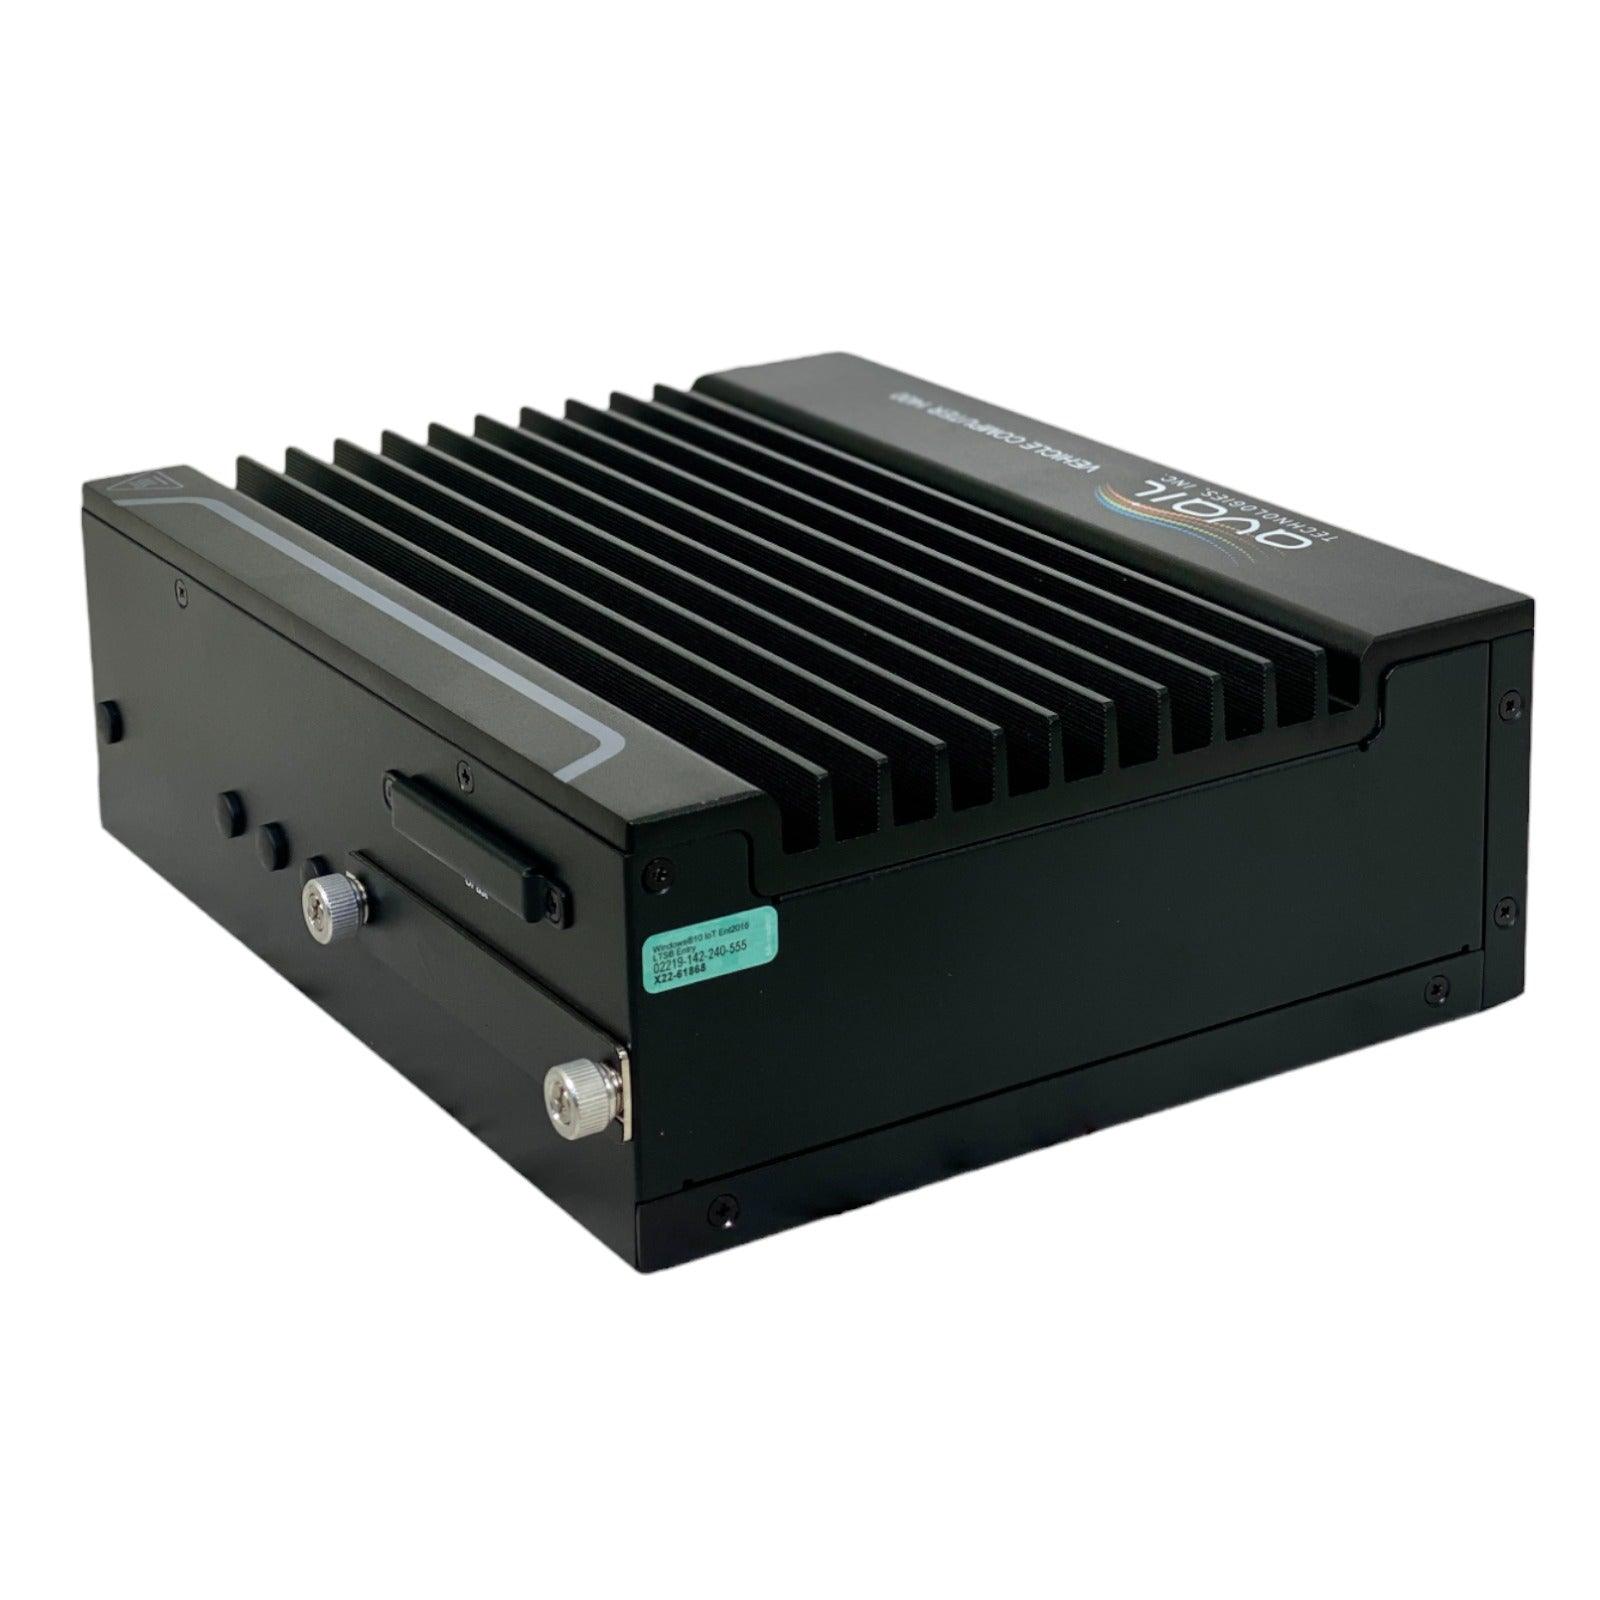 Mxe-1400 Avail Technologies Integrated Fanless Embedded Computer - ADVANCED TRUCK PARTS